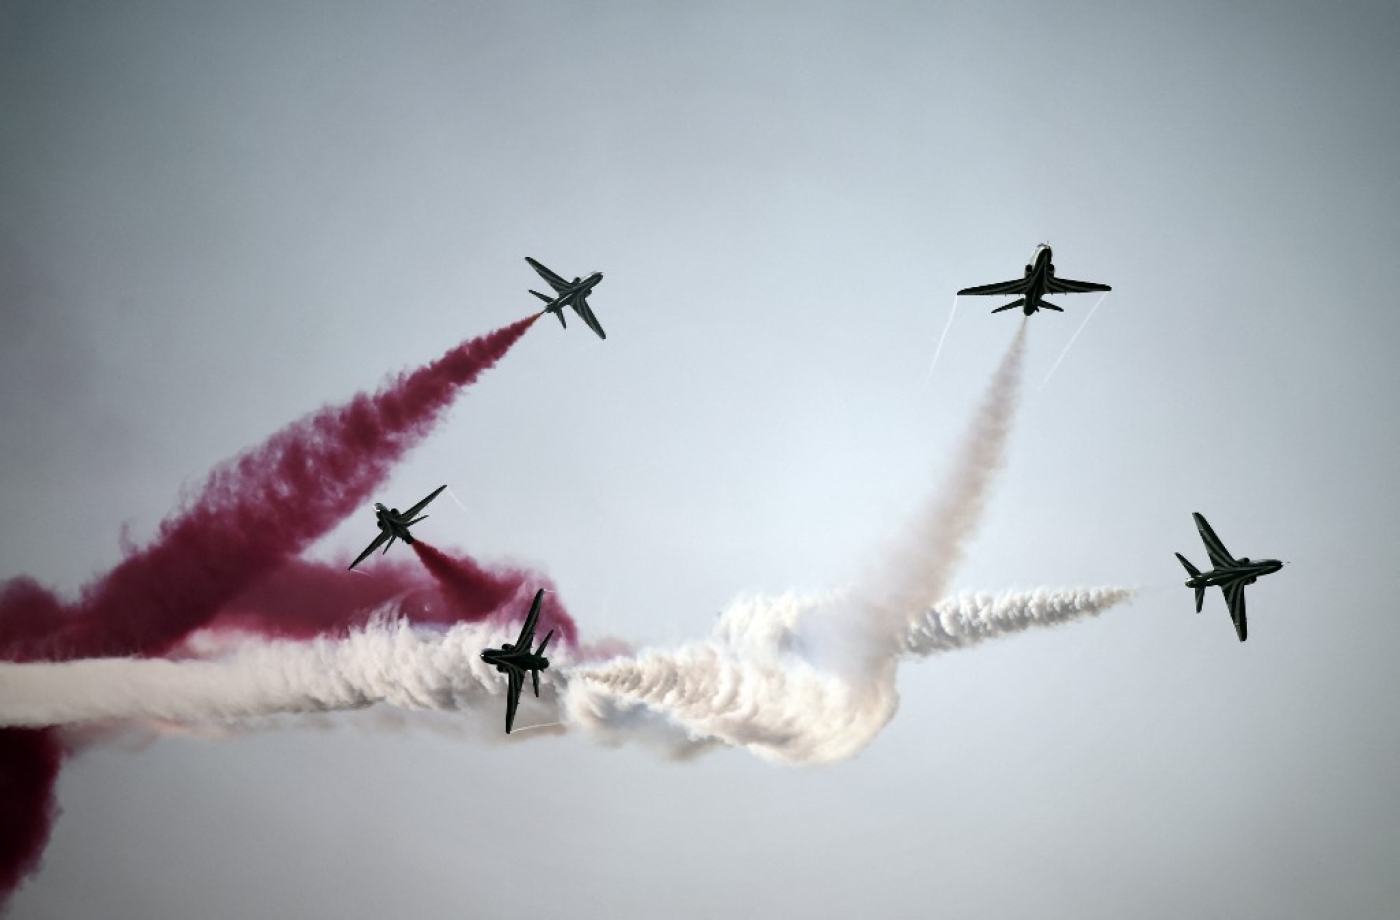 Saudi Hawks display team perform during the opening of the Bahrain International Airshow 2016, in Sakhir, south of the capital Manama, on 21 January 2016 (AFP)